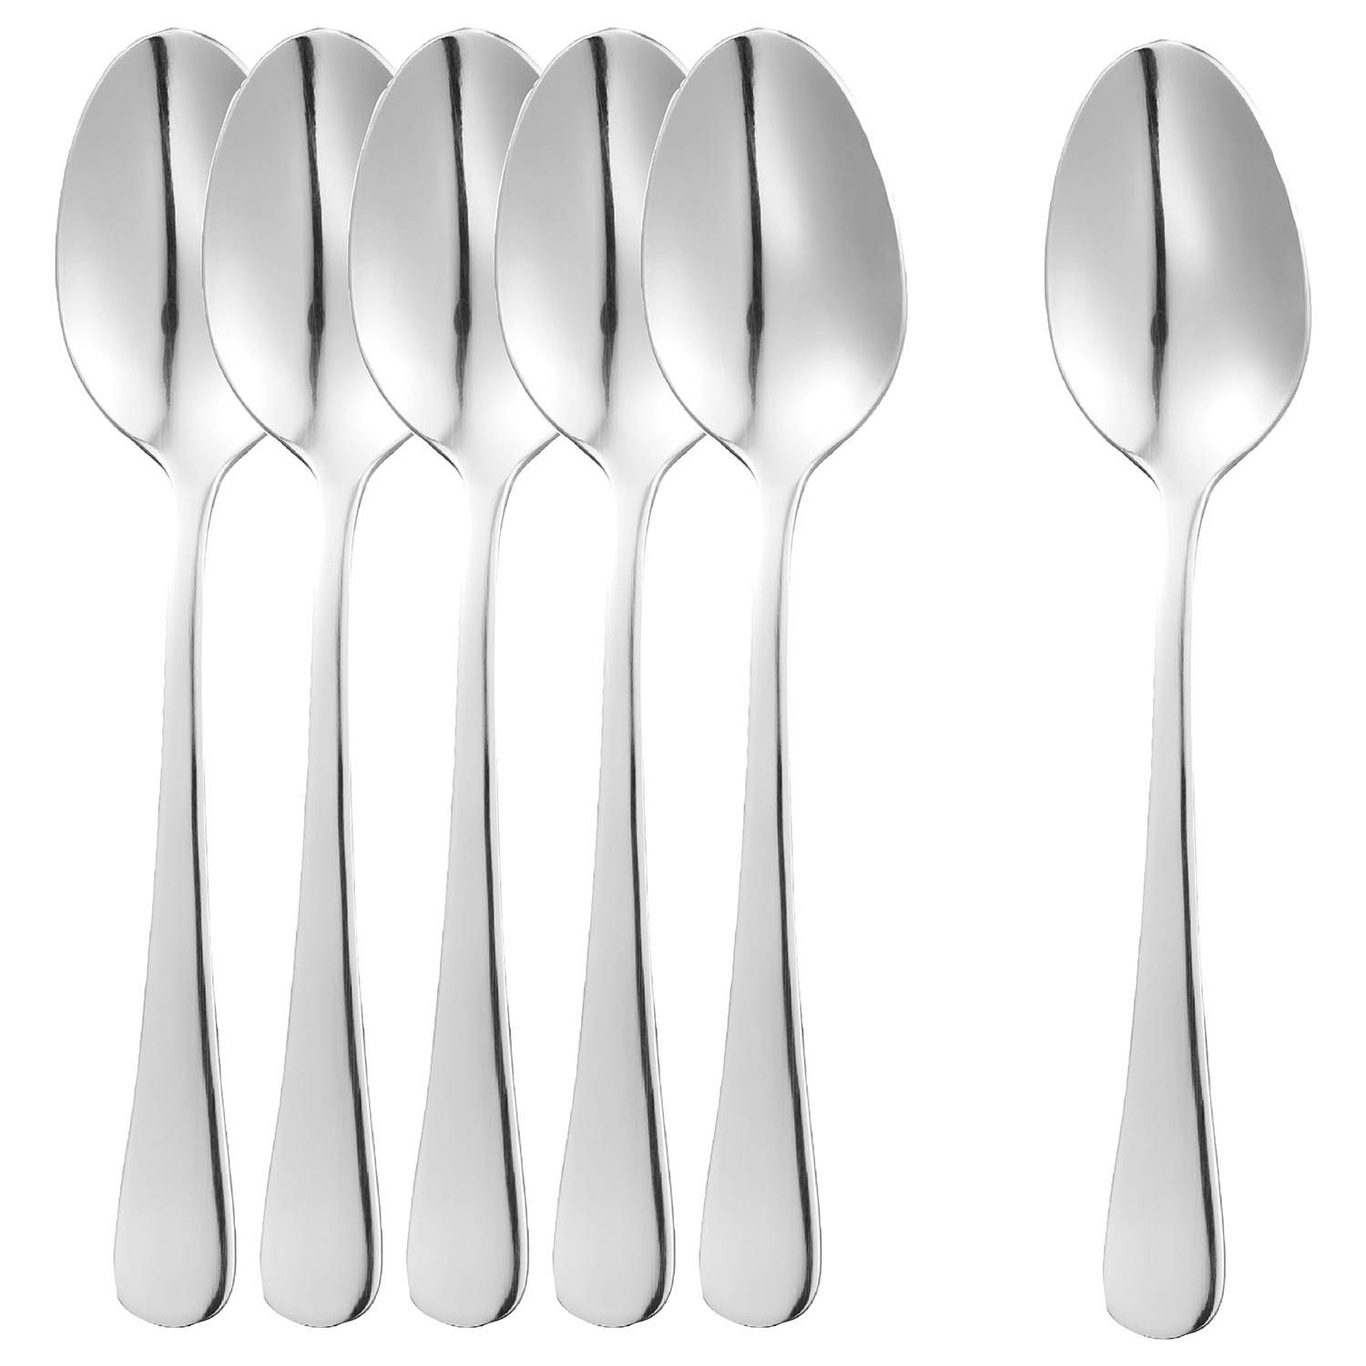 Classic Coffee Spoon, 6-pack